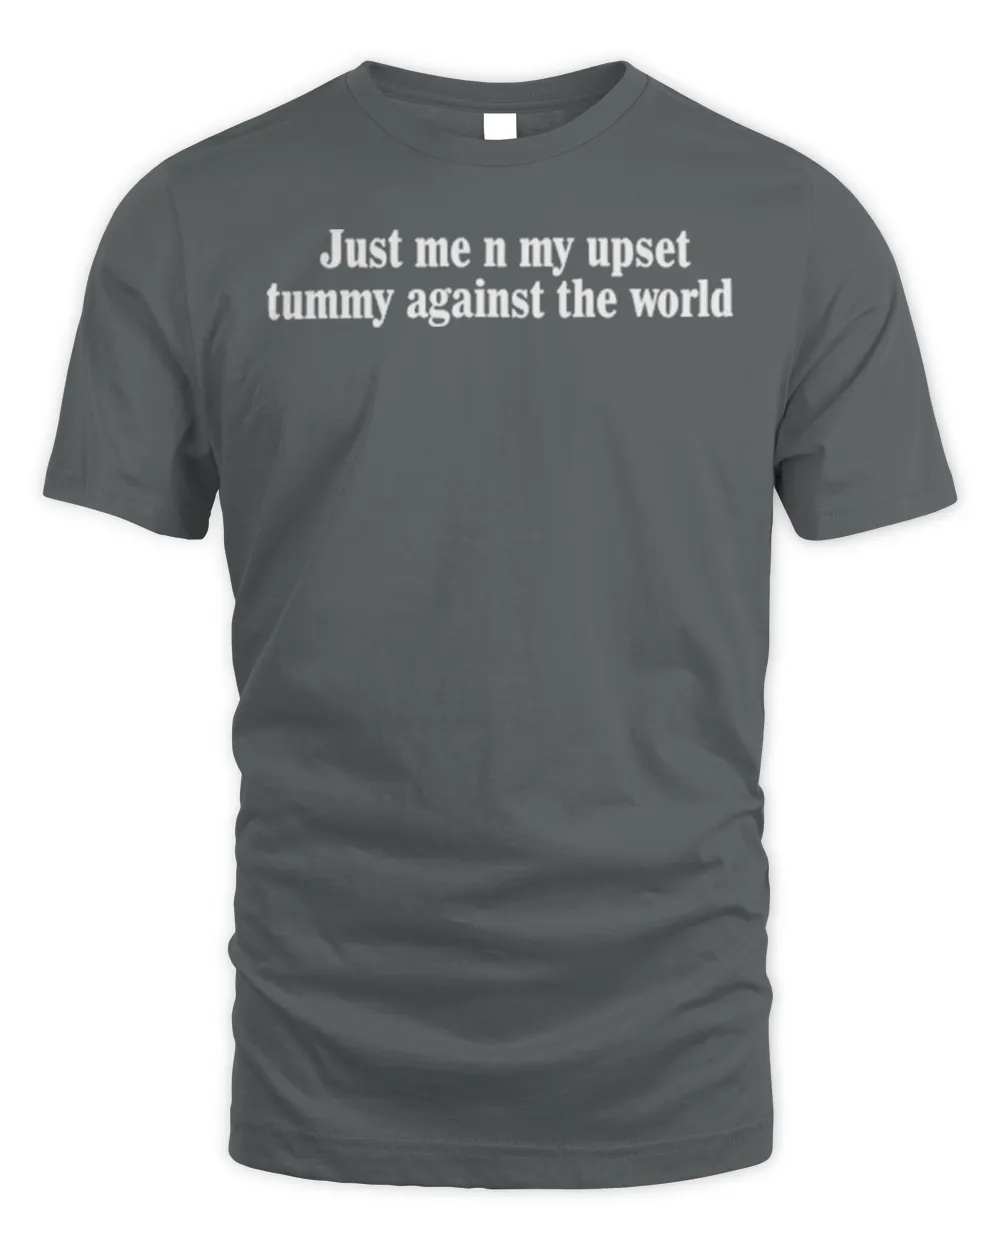 Just me n my upset tummy against the world t-shirt